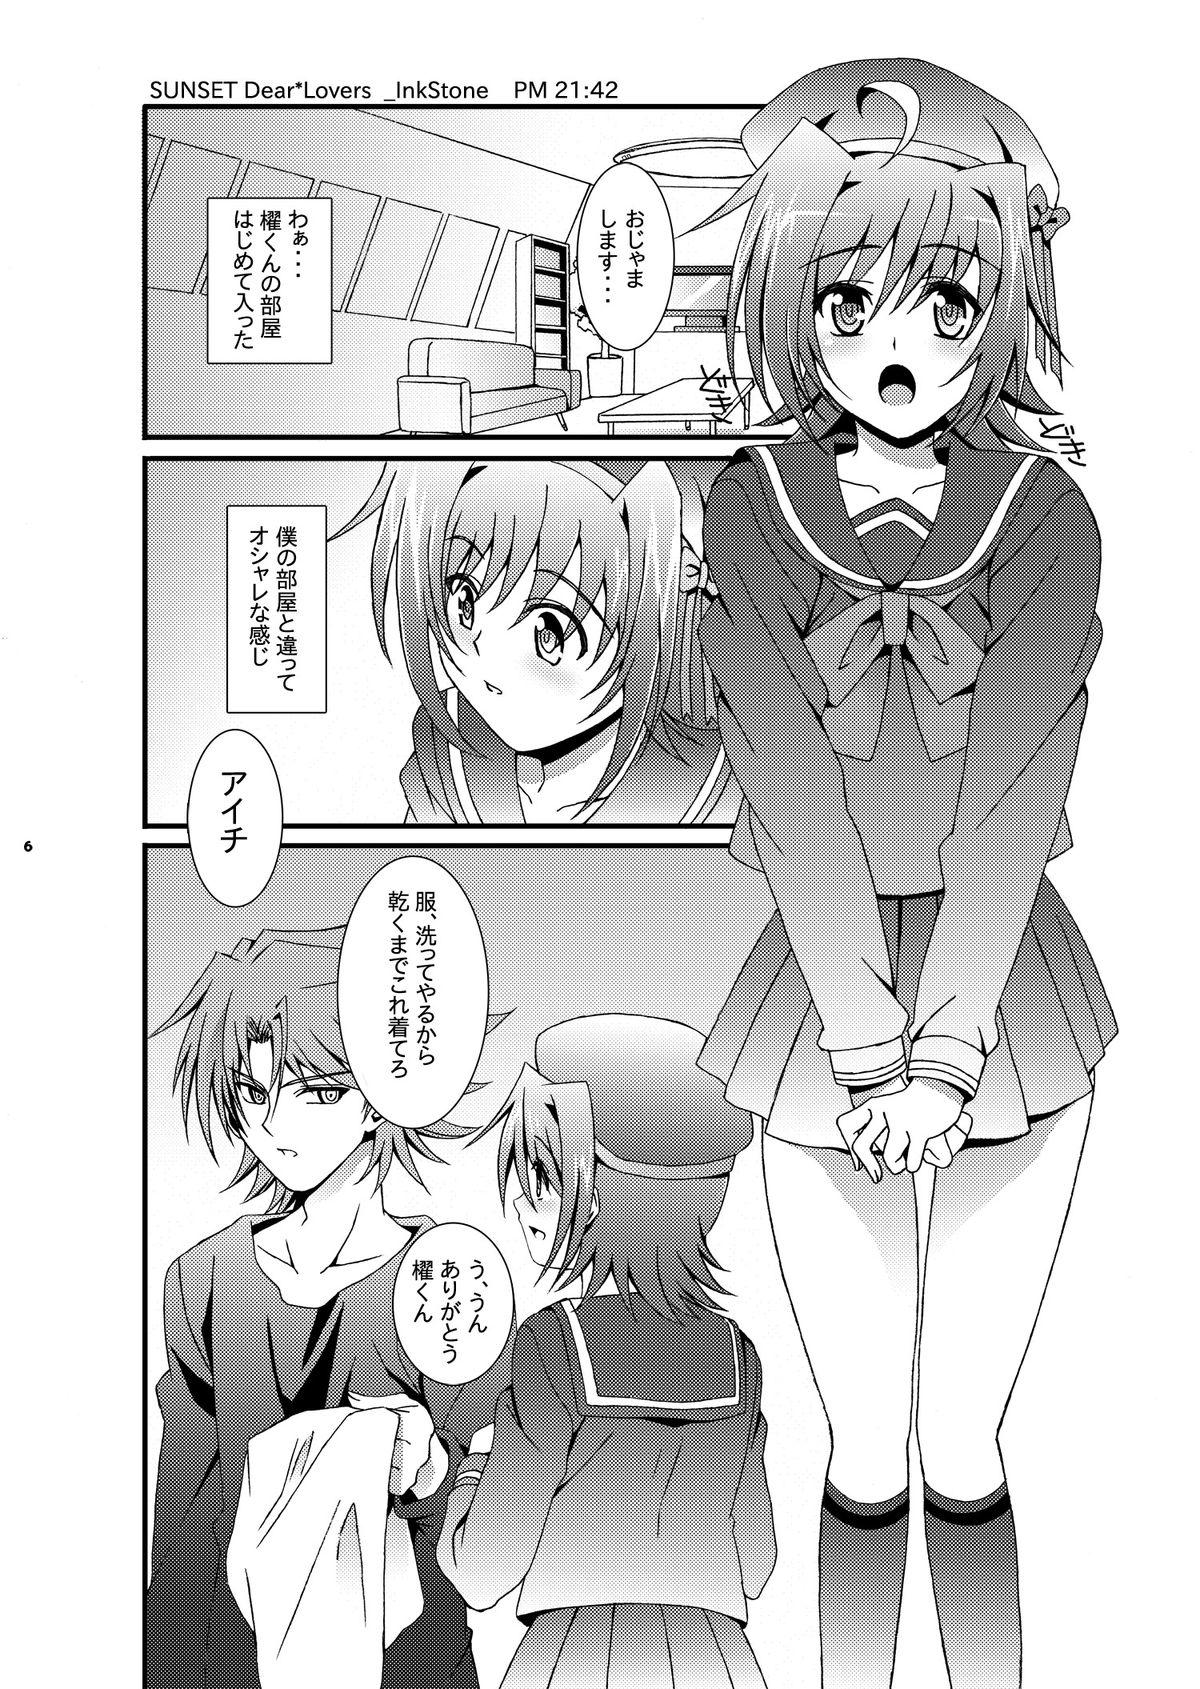 Gay Cut SUNSET Dear Lovers - Cardfight vanguard Pick Up - Page 7